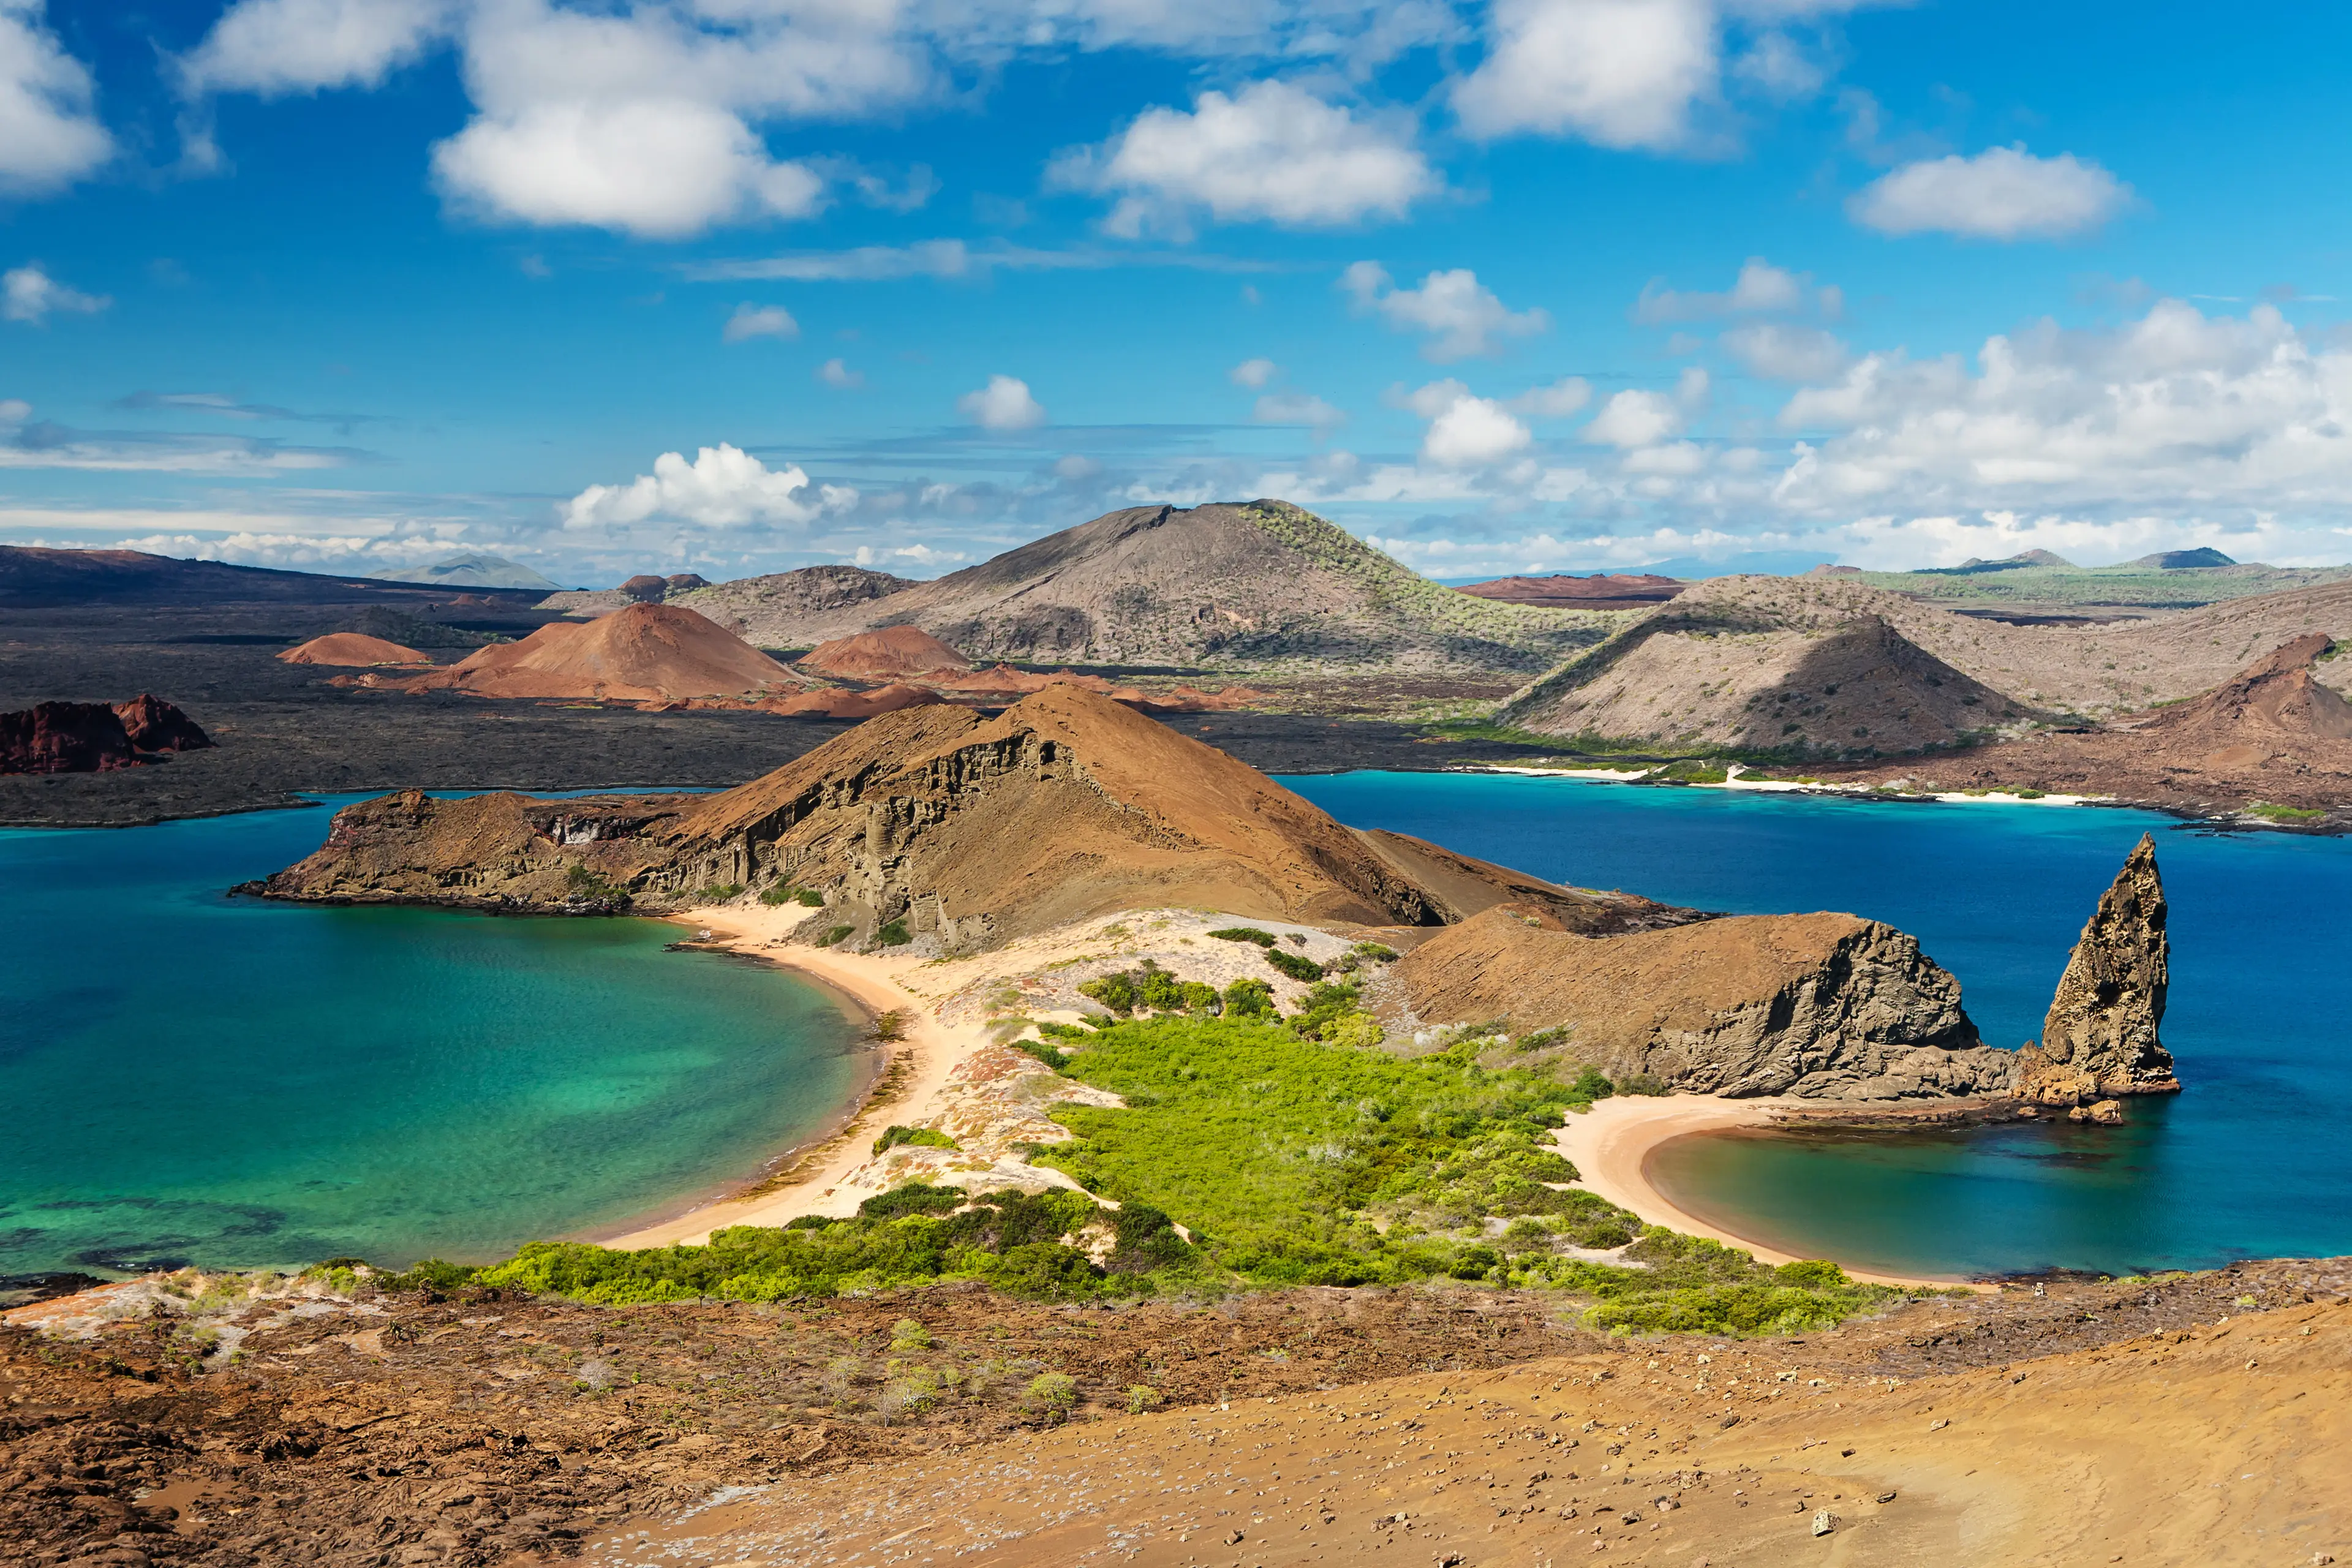 3-Day Family Adventure and Sightseeing in Galapagos Islands